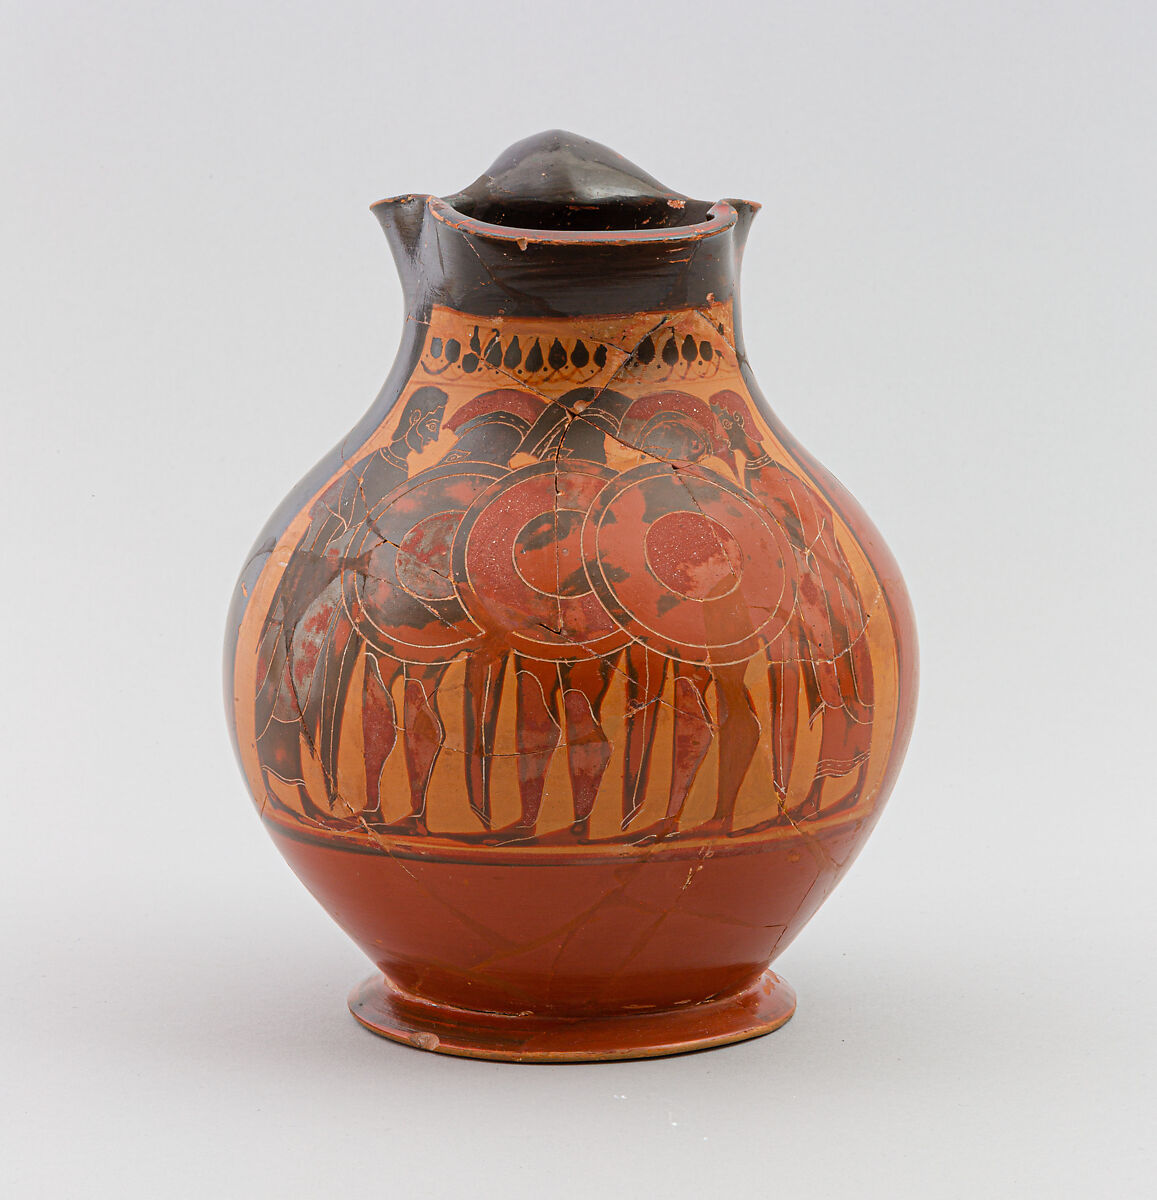 Terracotta oinochoe: chous (jug), Attributed to the Amasis Painter, Terracotta, Greek, Attic 